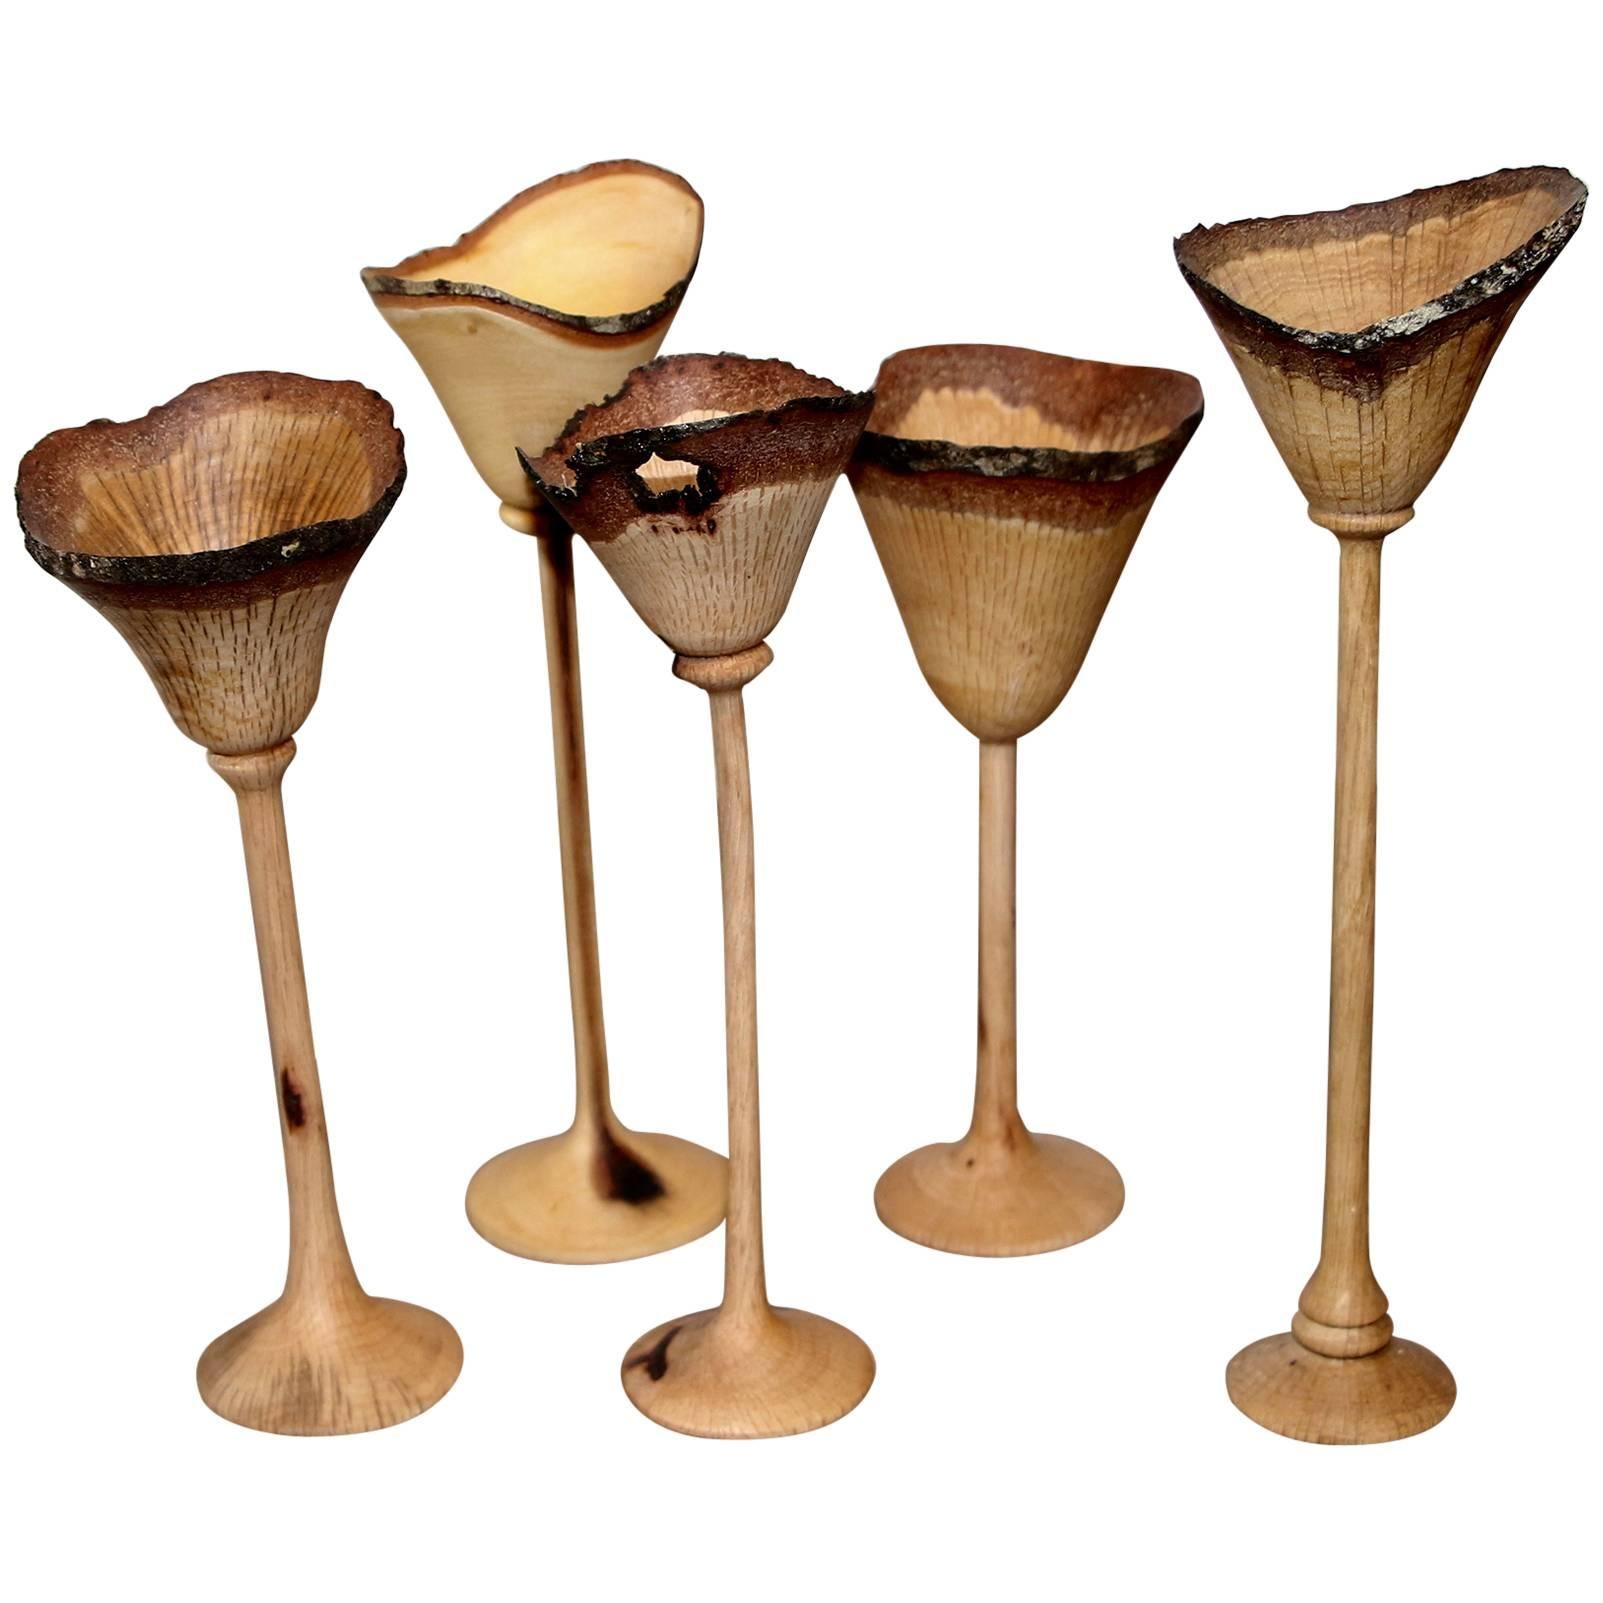 Exquisite Set of Five Hand-Turned Wood Cups by Paul Maurer For Sale